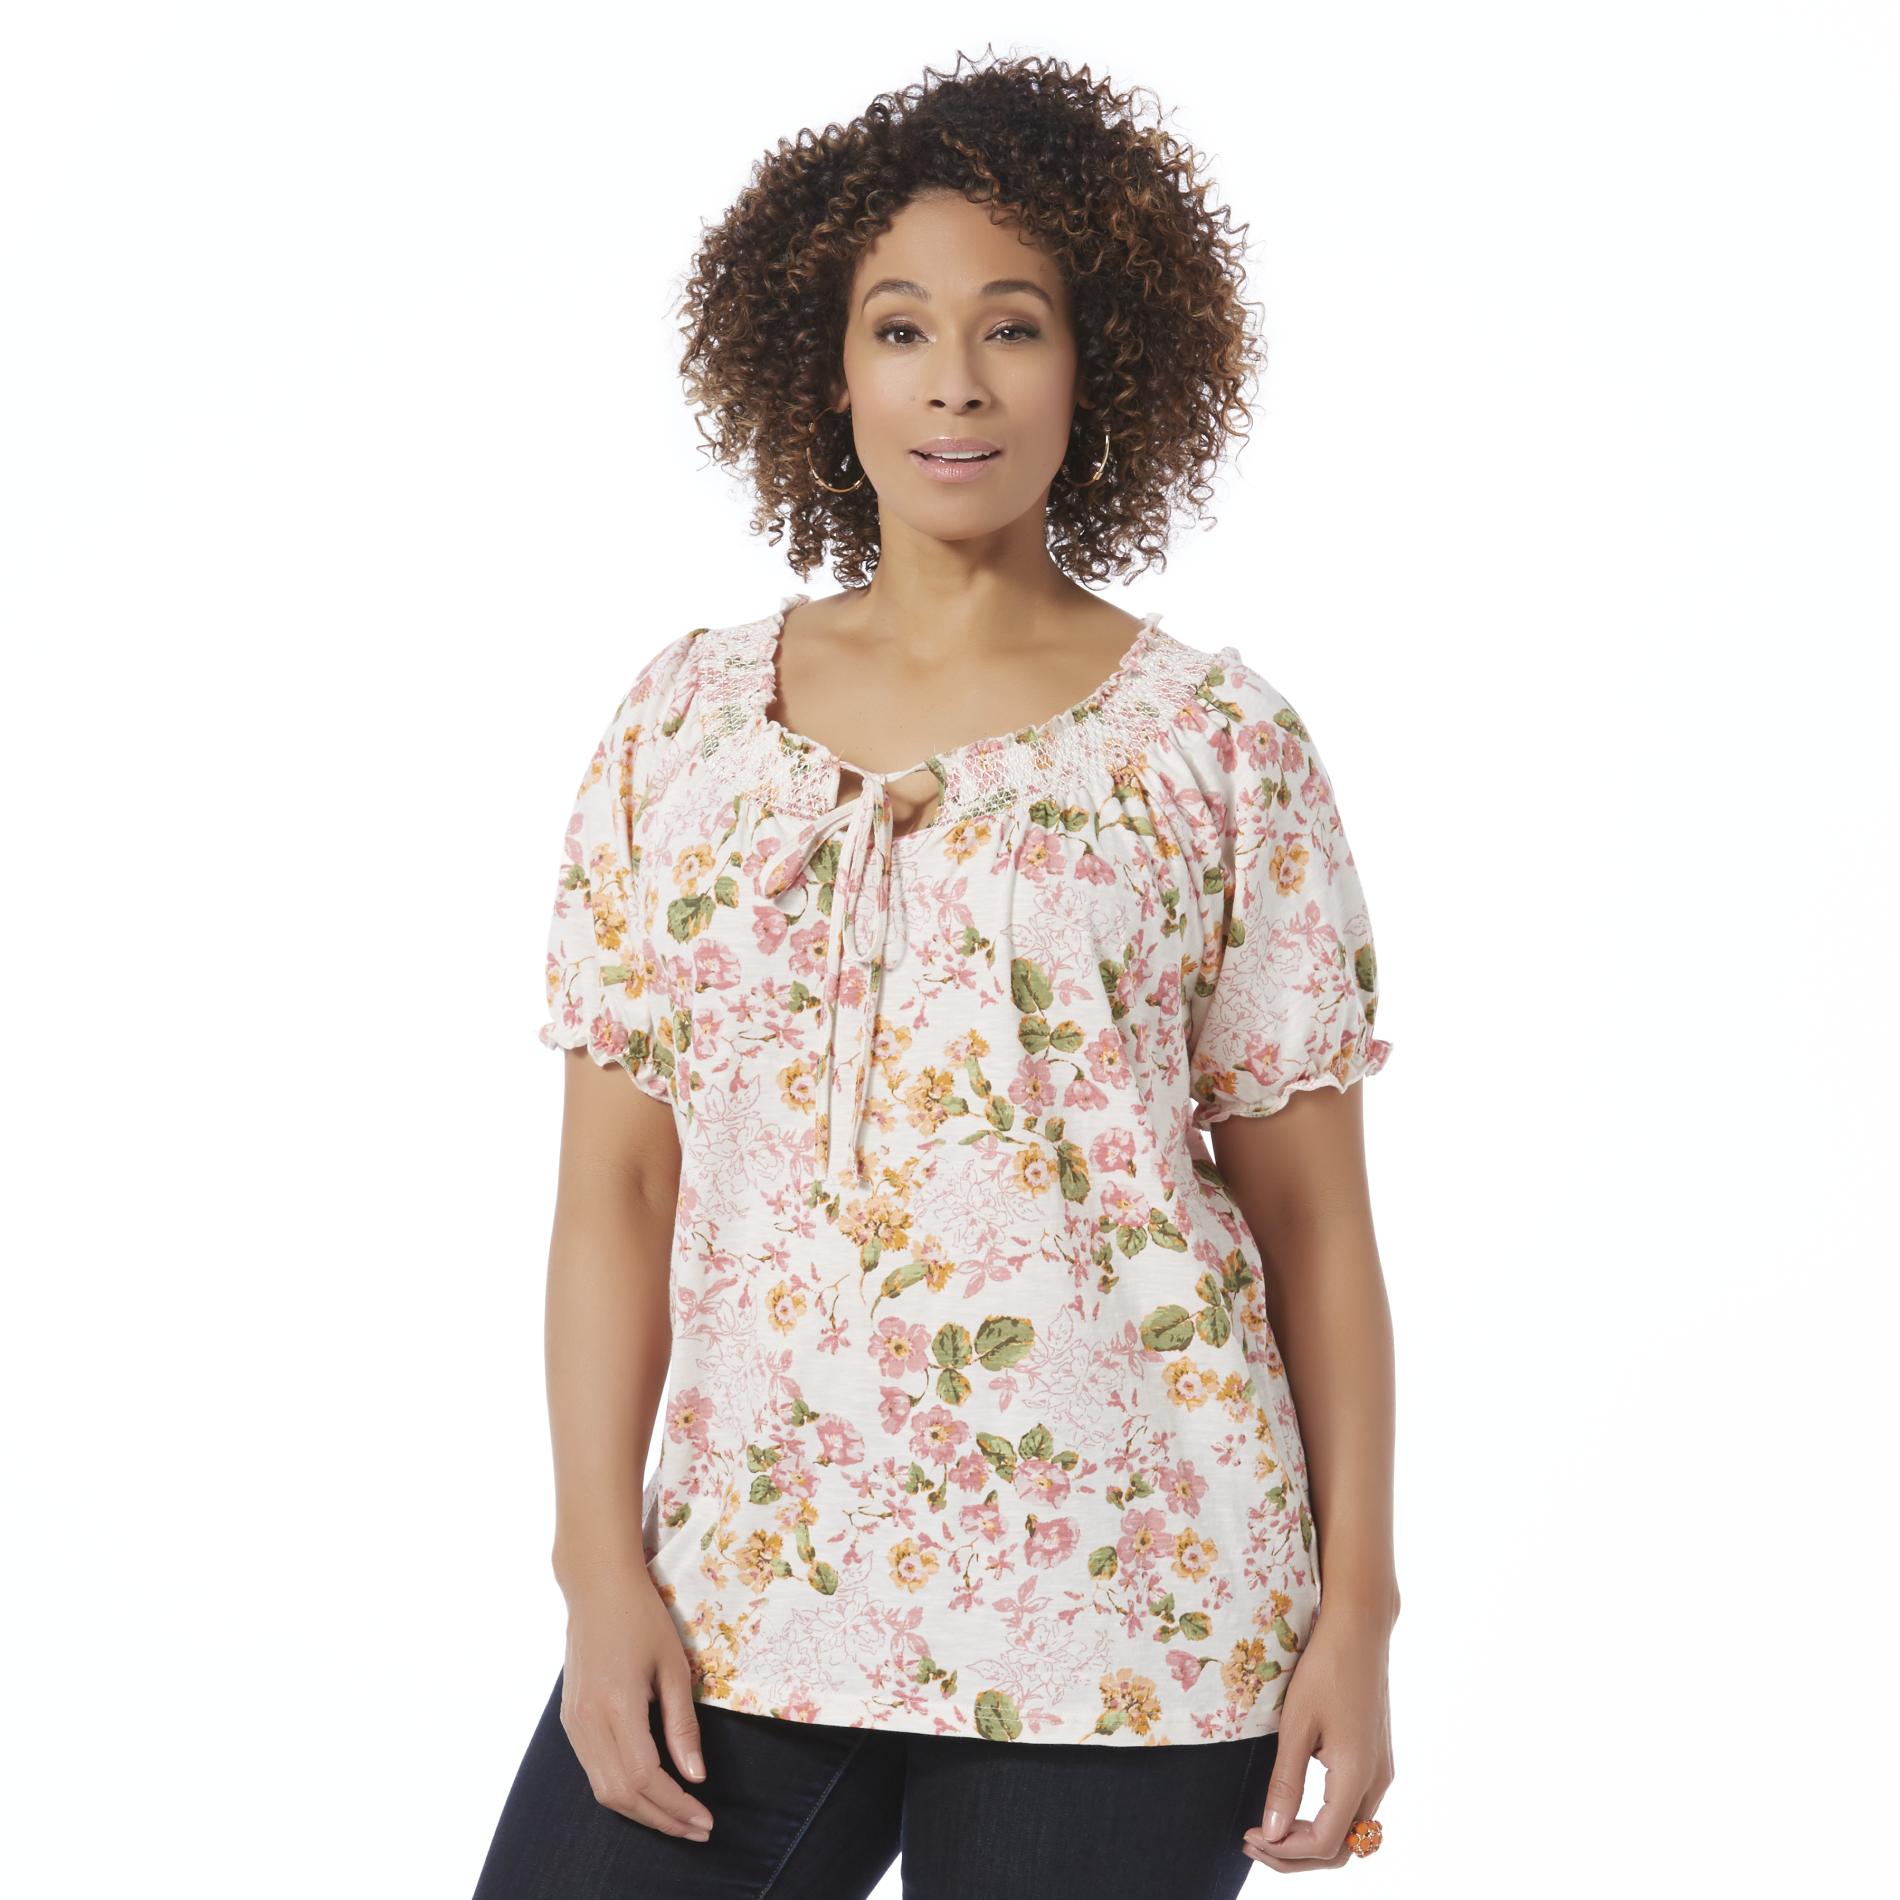 Basic Editions Women's Plus Knit Peasant Top - Floral